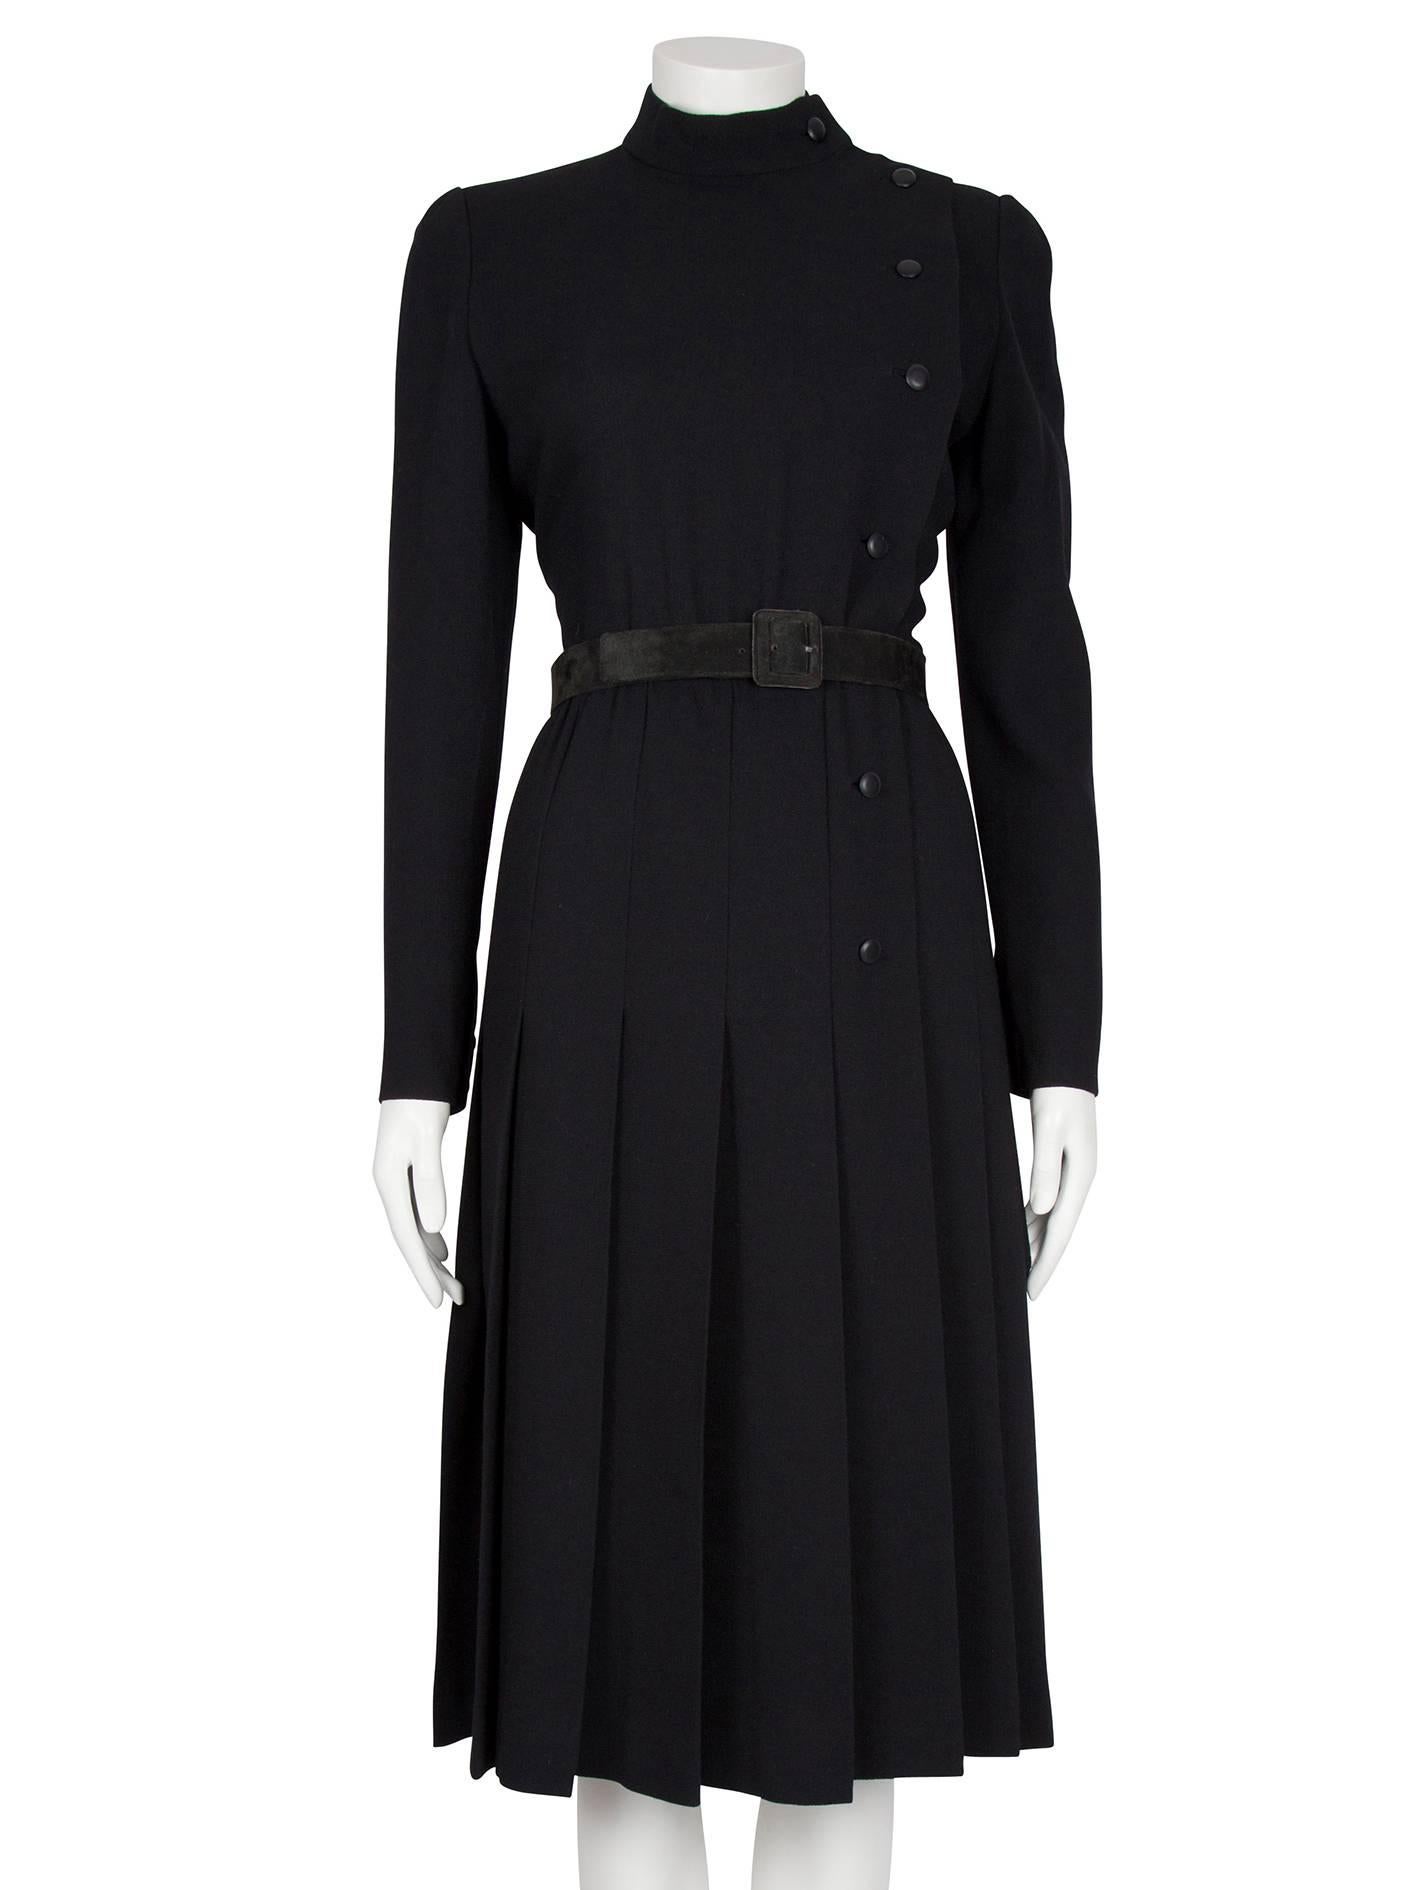 A/W 1979 Dior Couture Black Silk Crepe Button-Down Wrap Dress with Suede Belt In Excellent Condition For Sale In London, GB